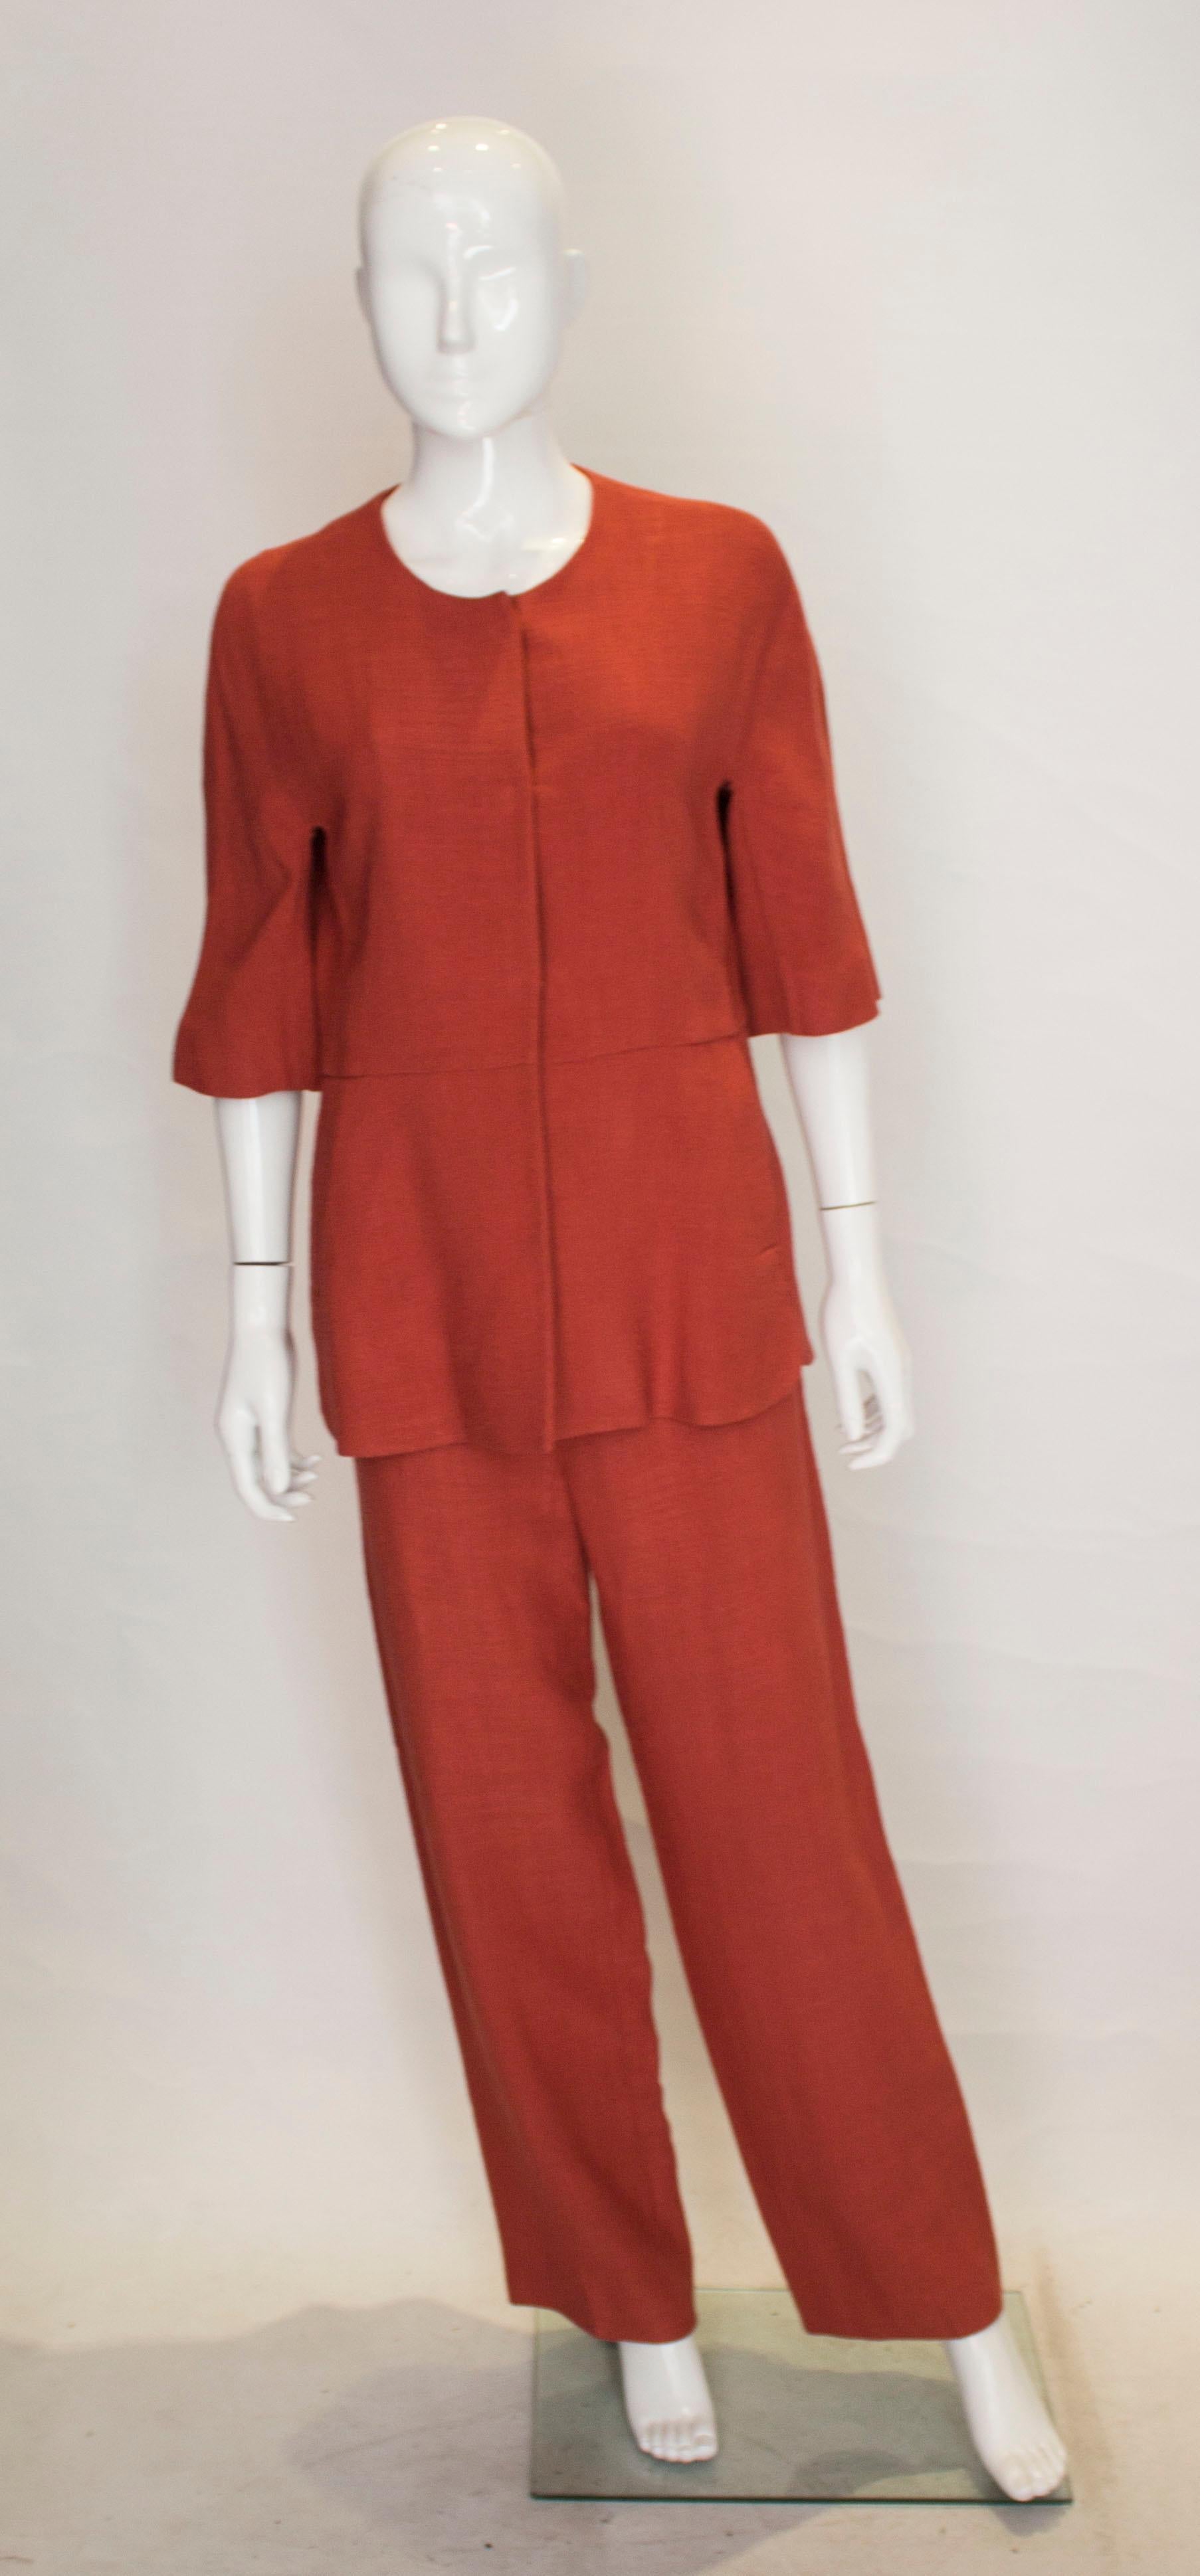 A chic trousers/pant suit for Fall by Marni. The top is marked a size 44 , and has a popper front opening. It has short sleaves, a lined peplum and two pockets. 
The trousers  are marked size 42, have a front zip opening, and inside leg measuring